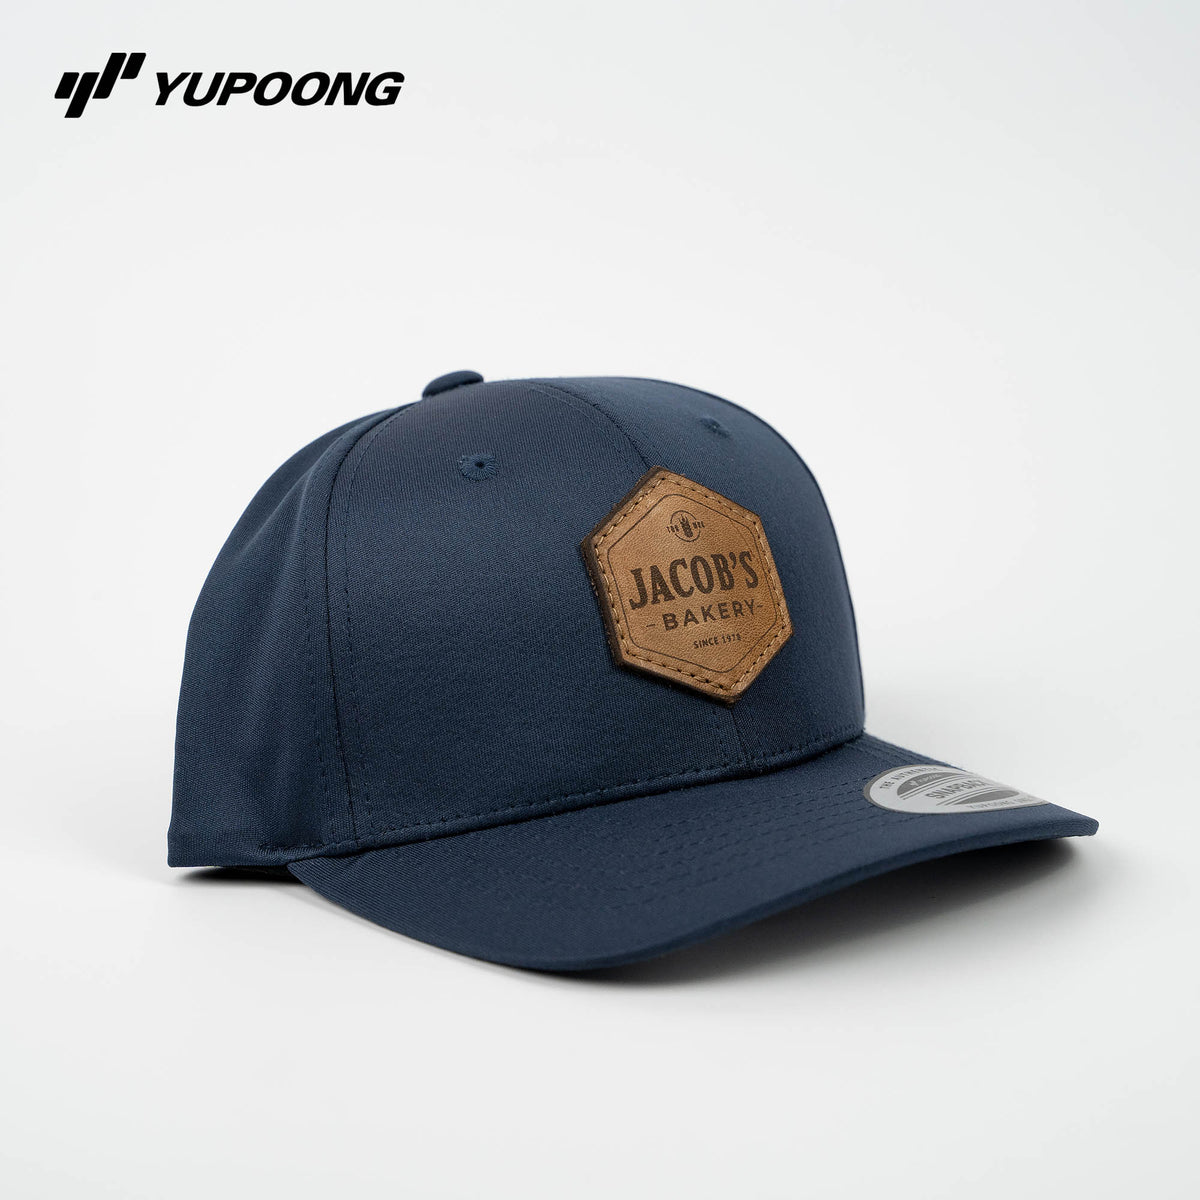 Yupoong TT801Y Youth Performance Baseball Cap - Custom Leather Patch Kids Hat